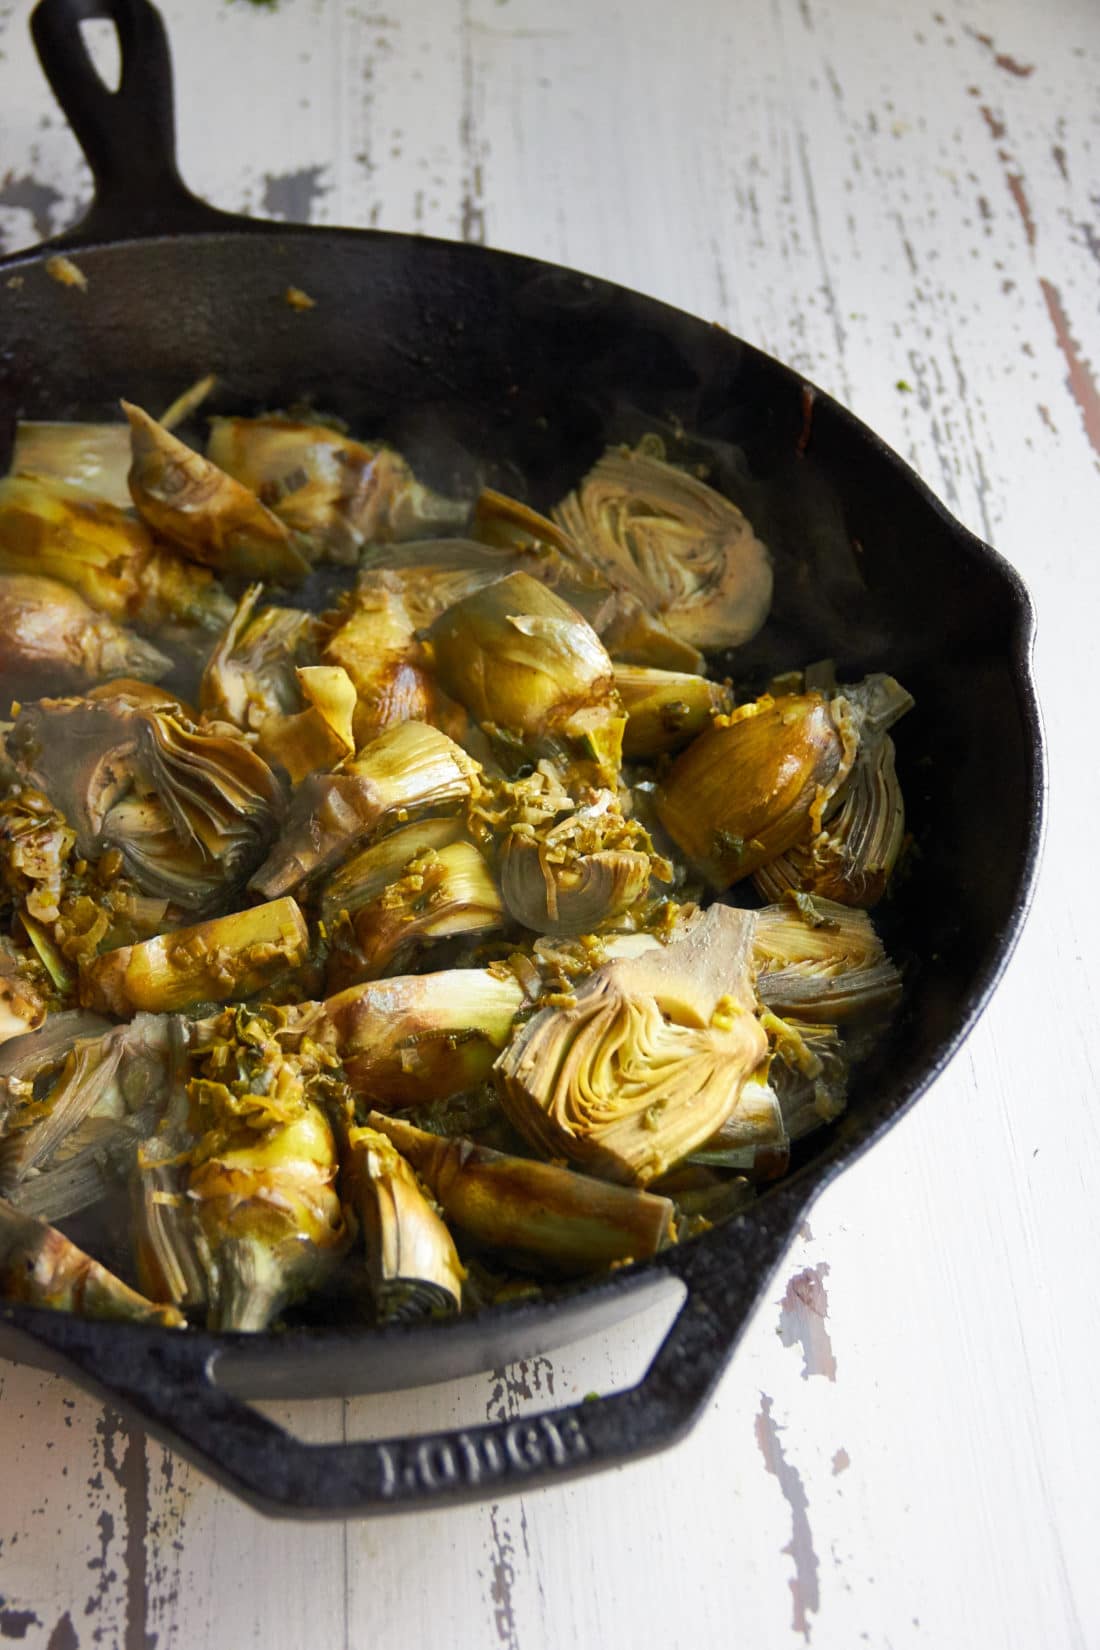 Braised Baby Artichokes with Leeks and Capers / Mia / Katie Workman / themom100.com